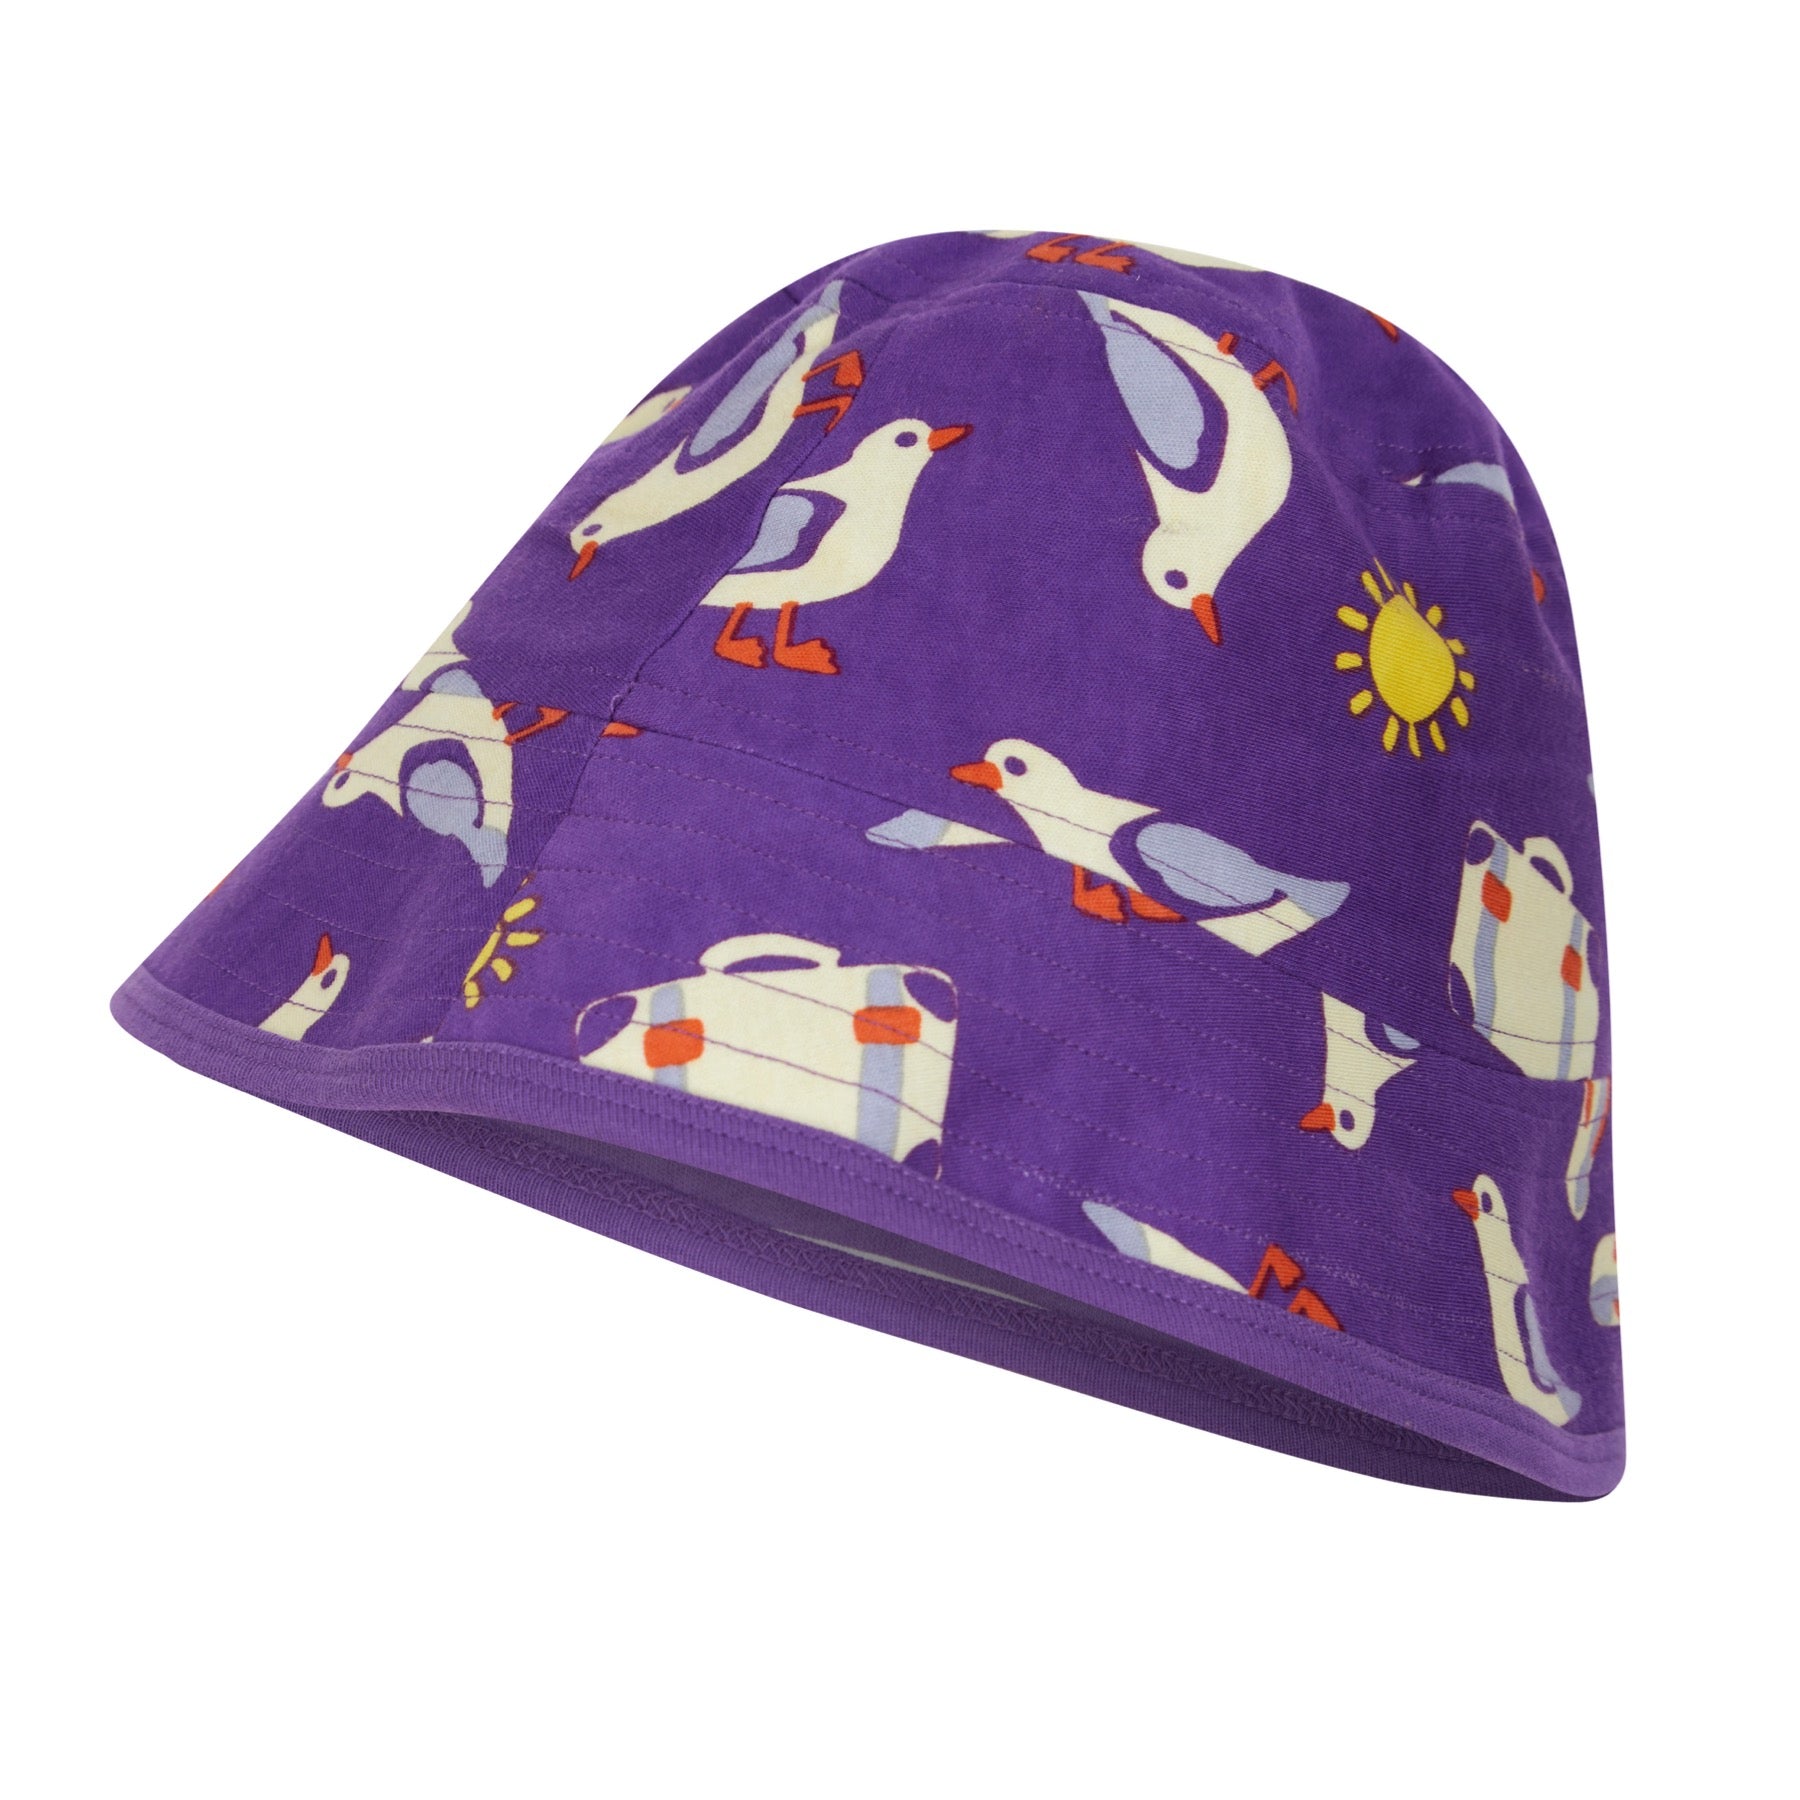 Piccalilly Reversible Sun Hat Seagulls